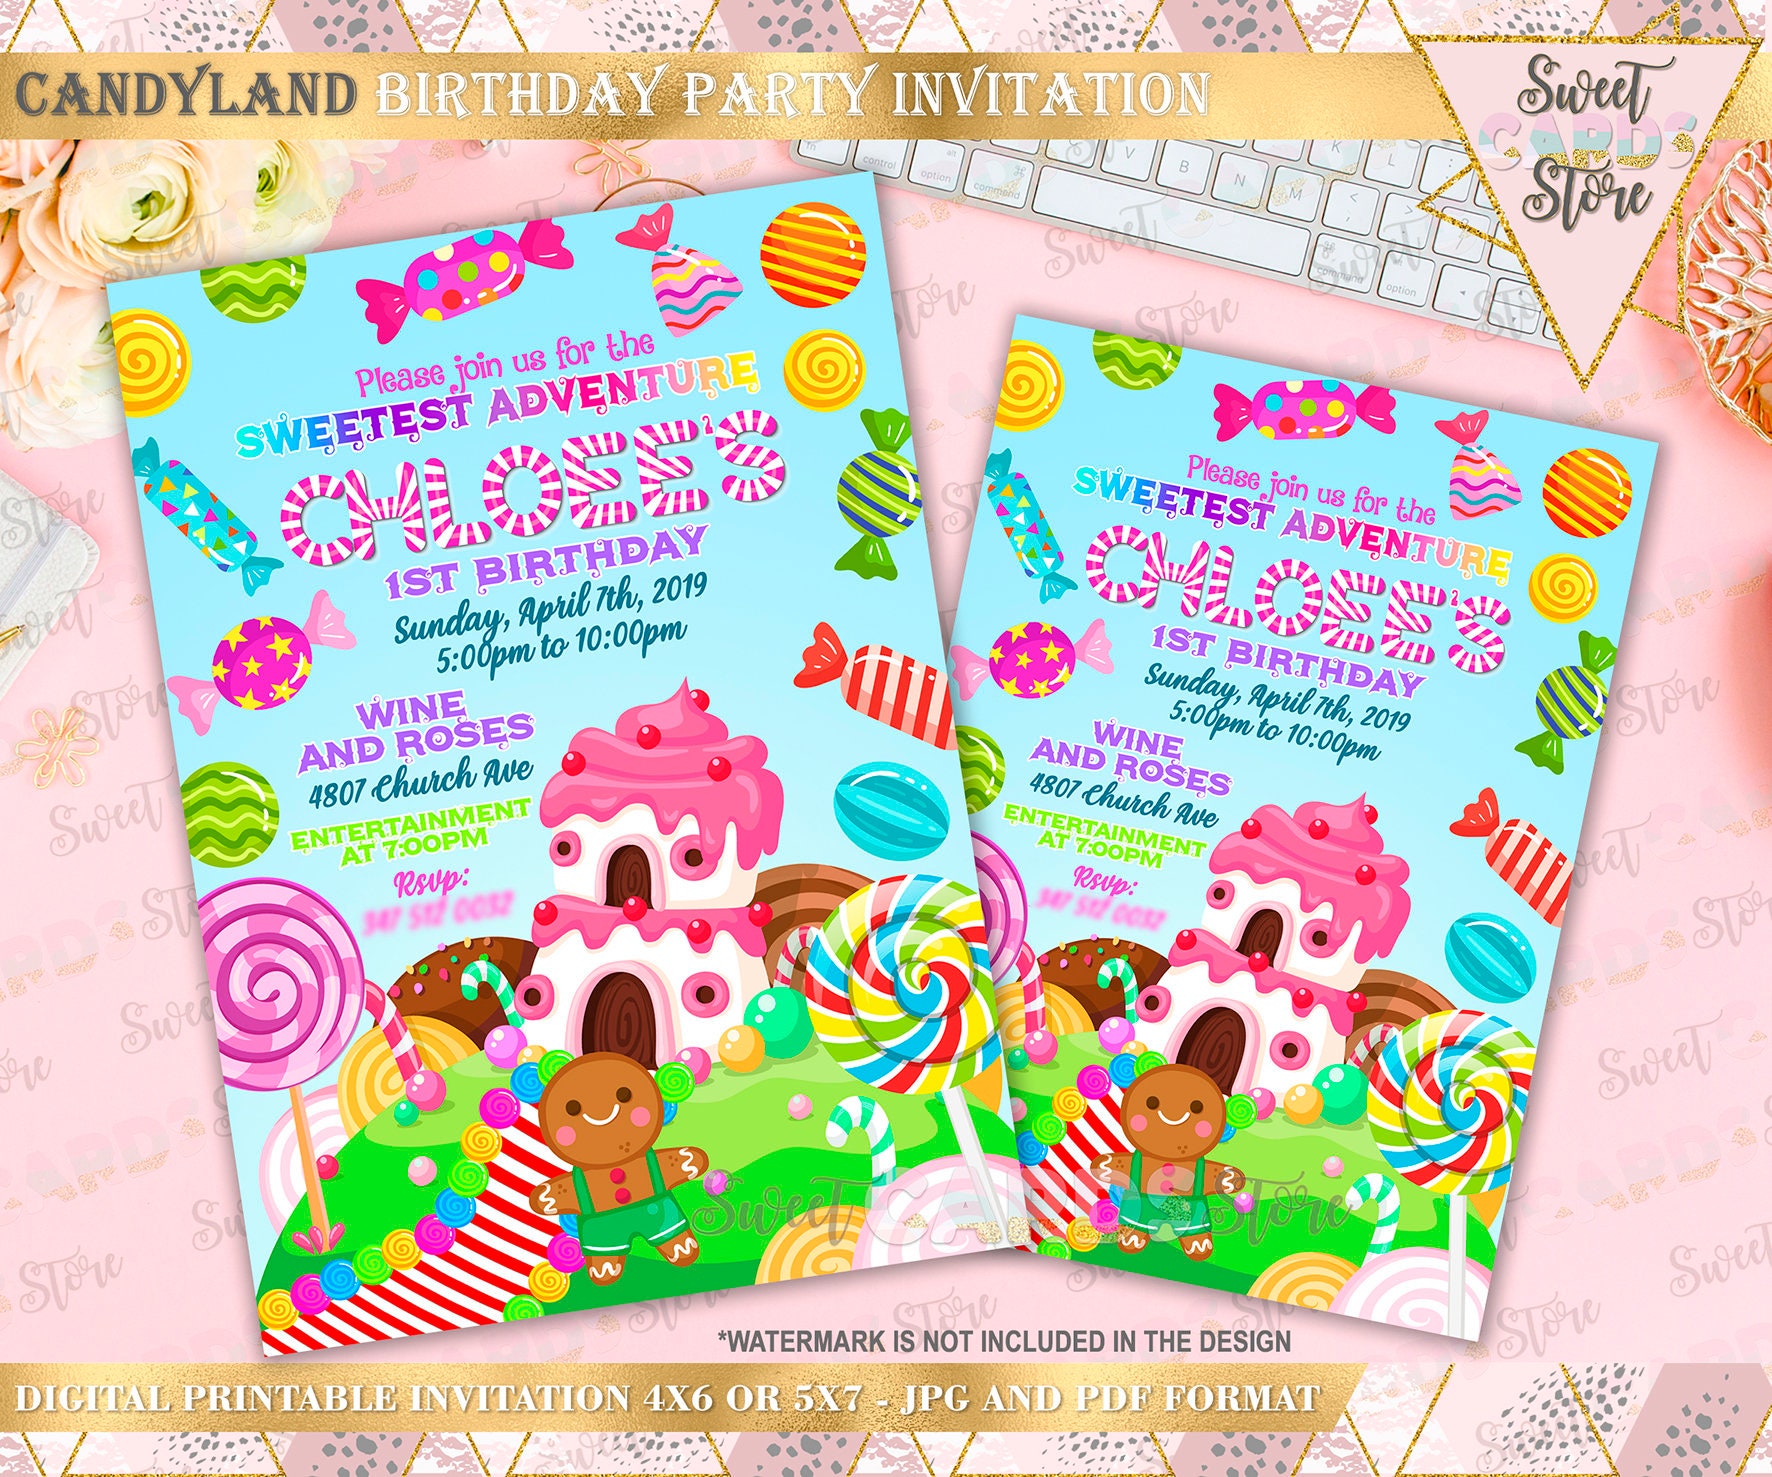 CANDY SHOPPE CANDYLAND PRINTABLE BIRTHDAY PARTY INVITATION & FREE THANK  U CARD C